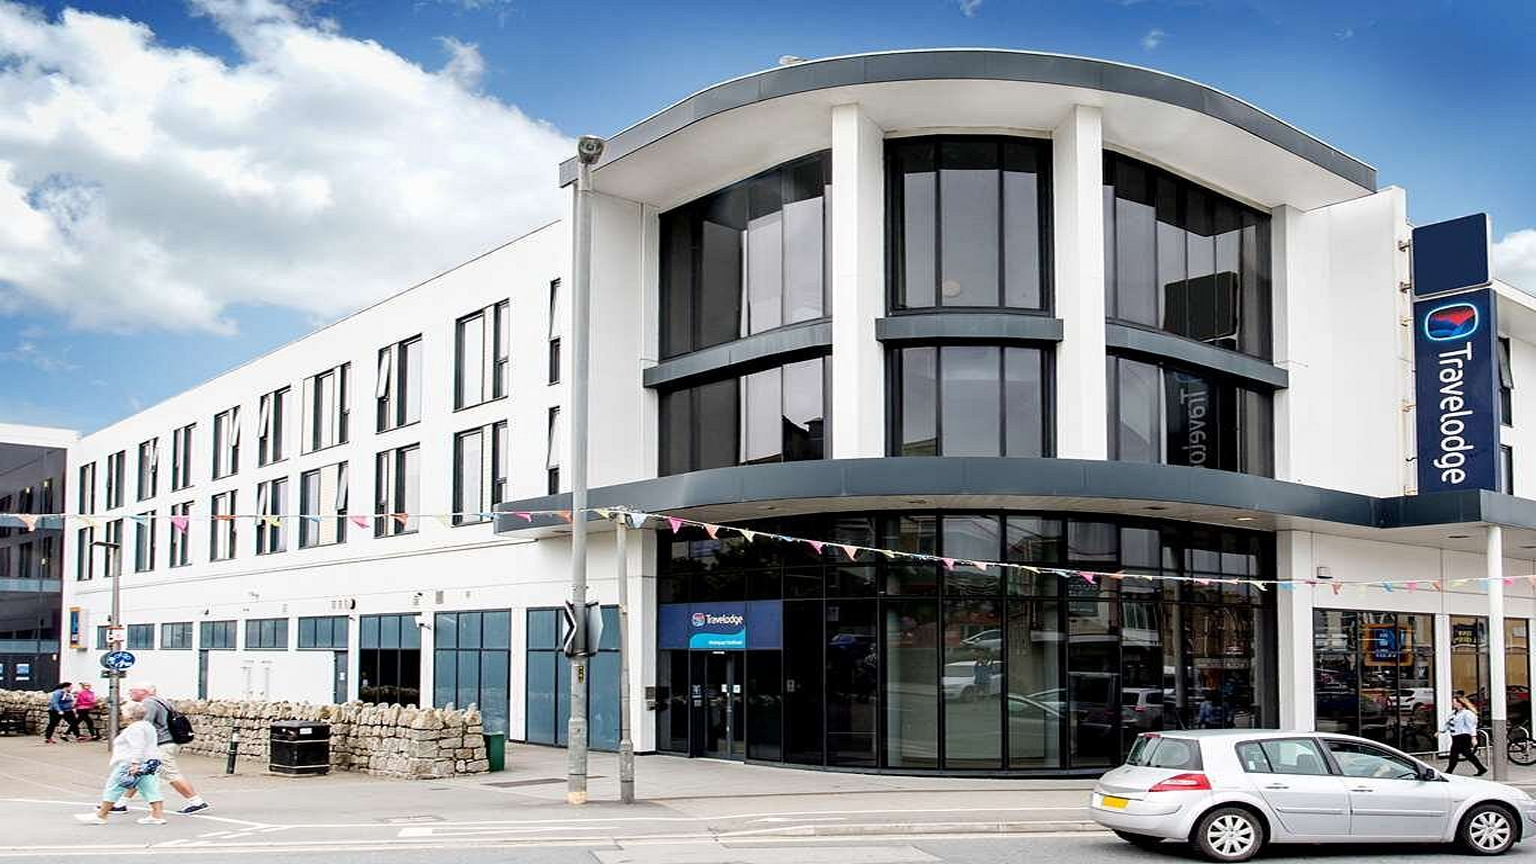 Travelodge-Newquay-Seafront-Hotel-newquay-clubbing